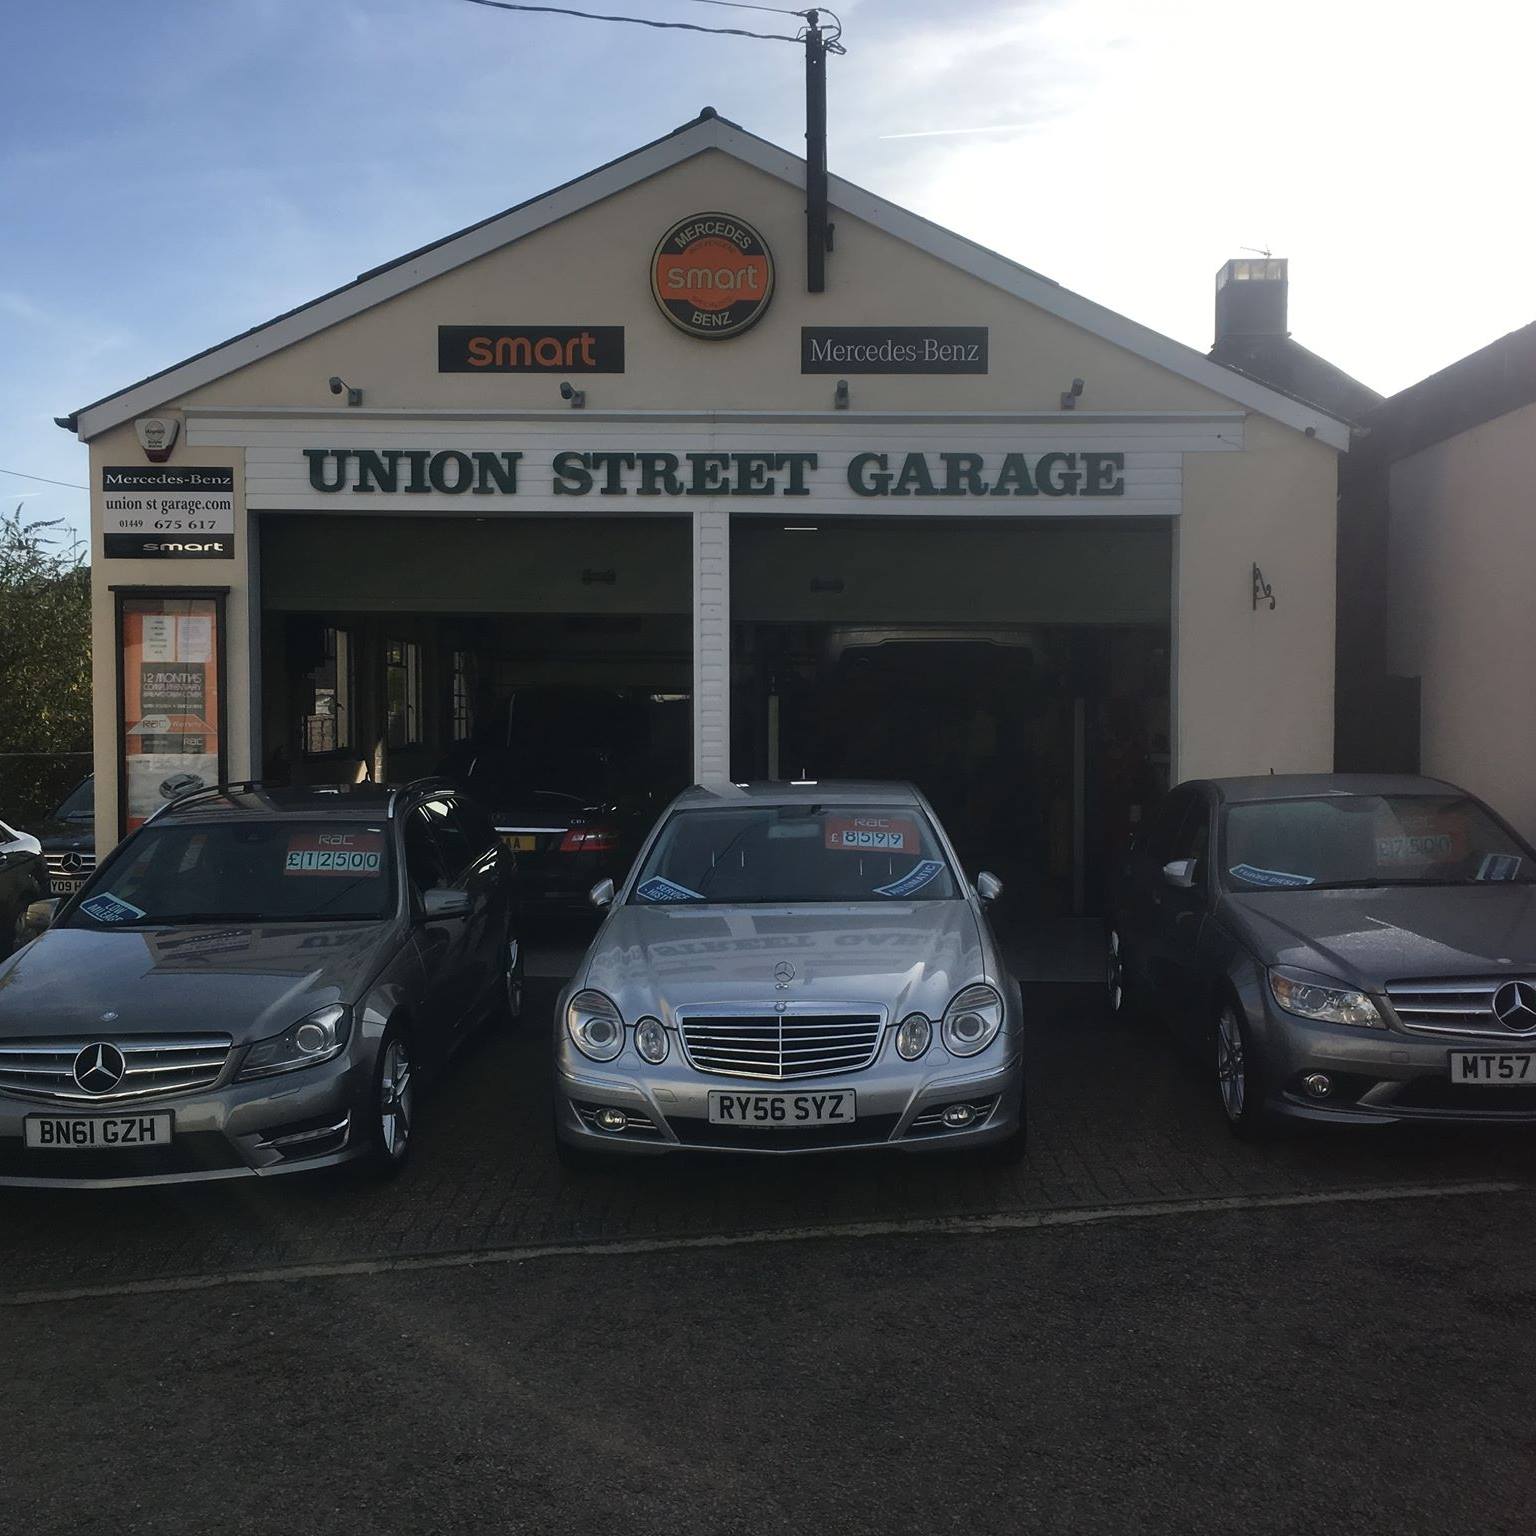 Union Street Garage - The best Mercedes and Smart car Specialist